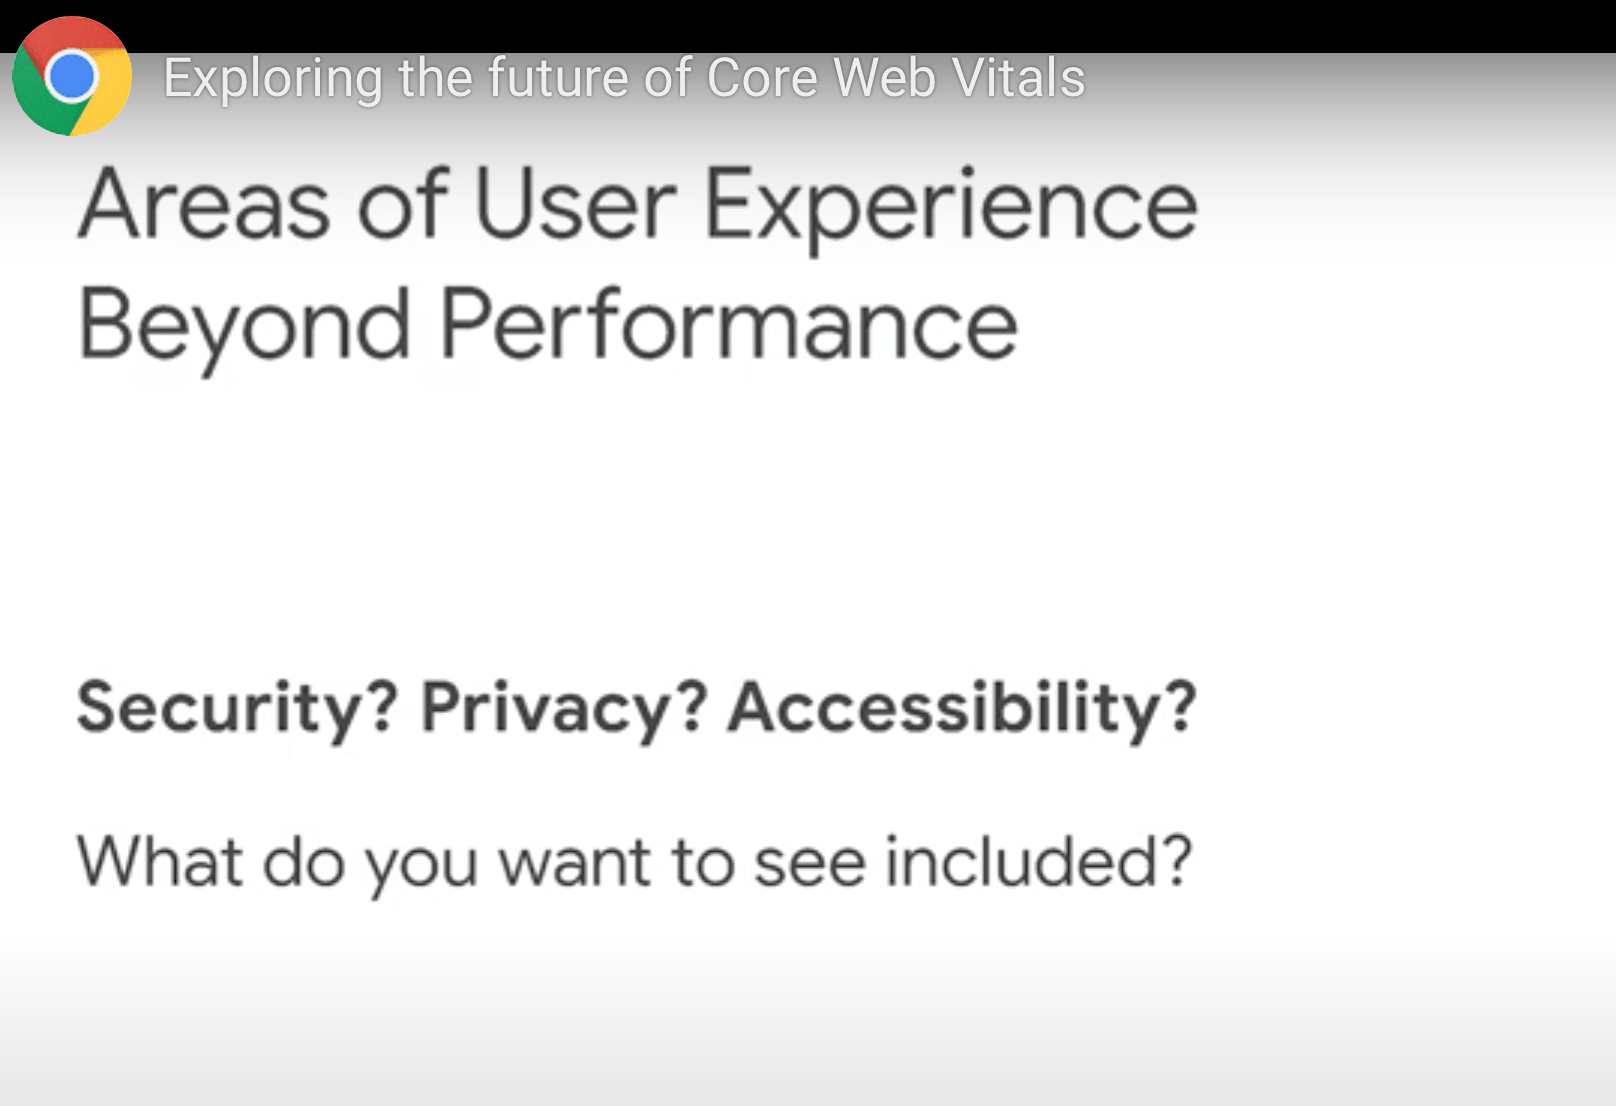 Google Web Vitals including security, privacy and accessibility?